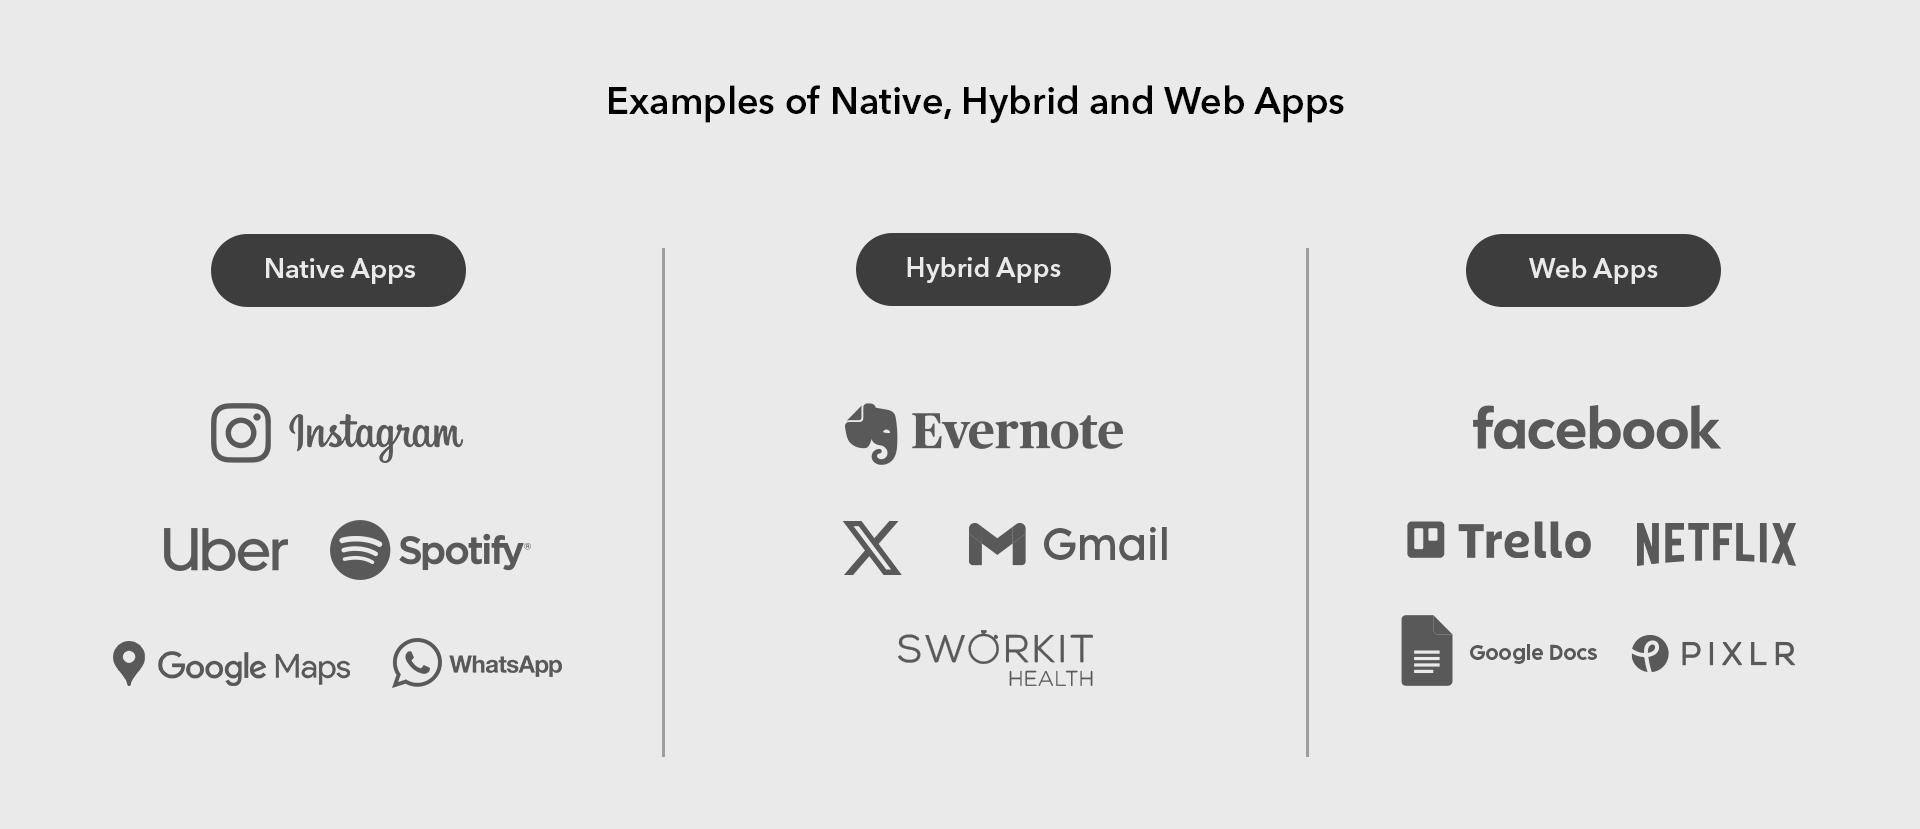 Examples of Native, Hybrid, and Web Apps